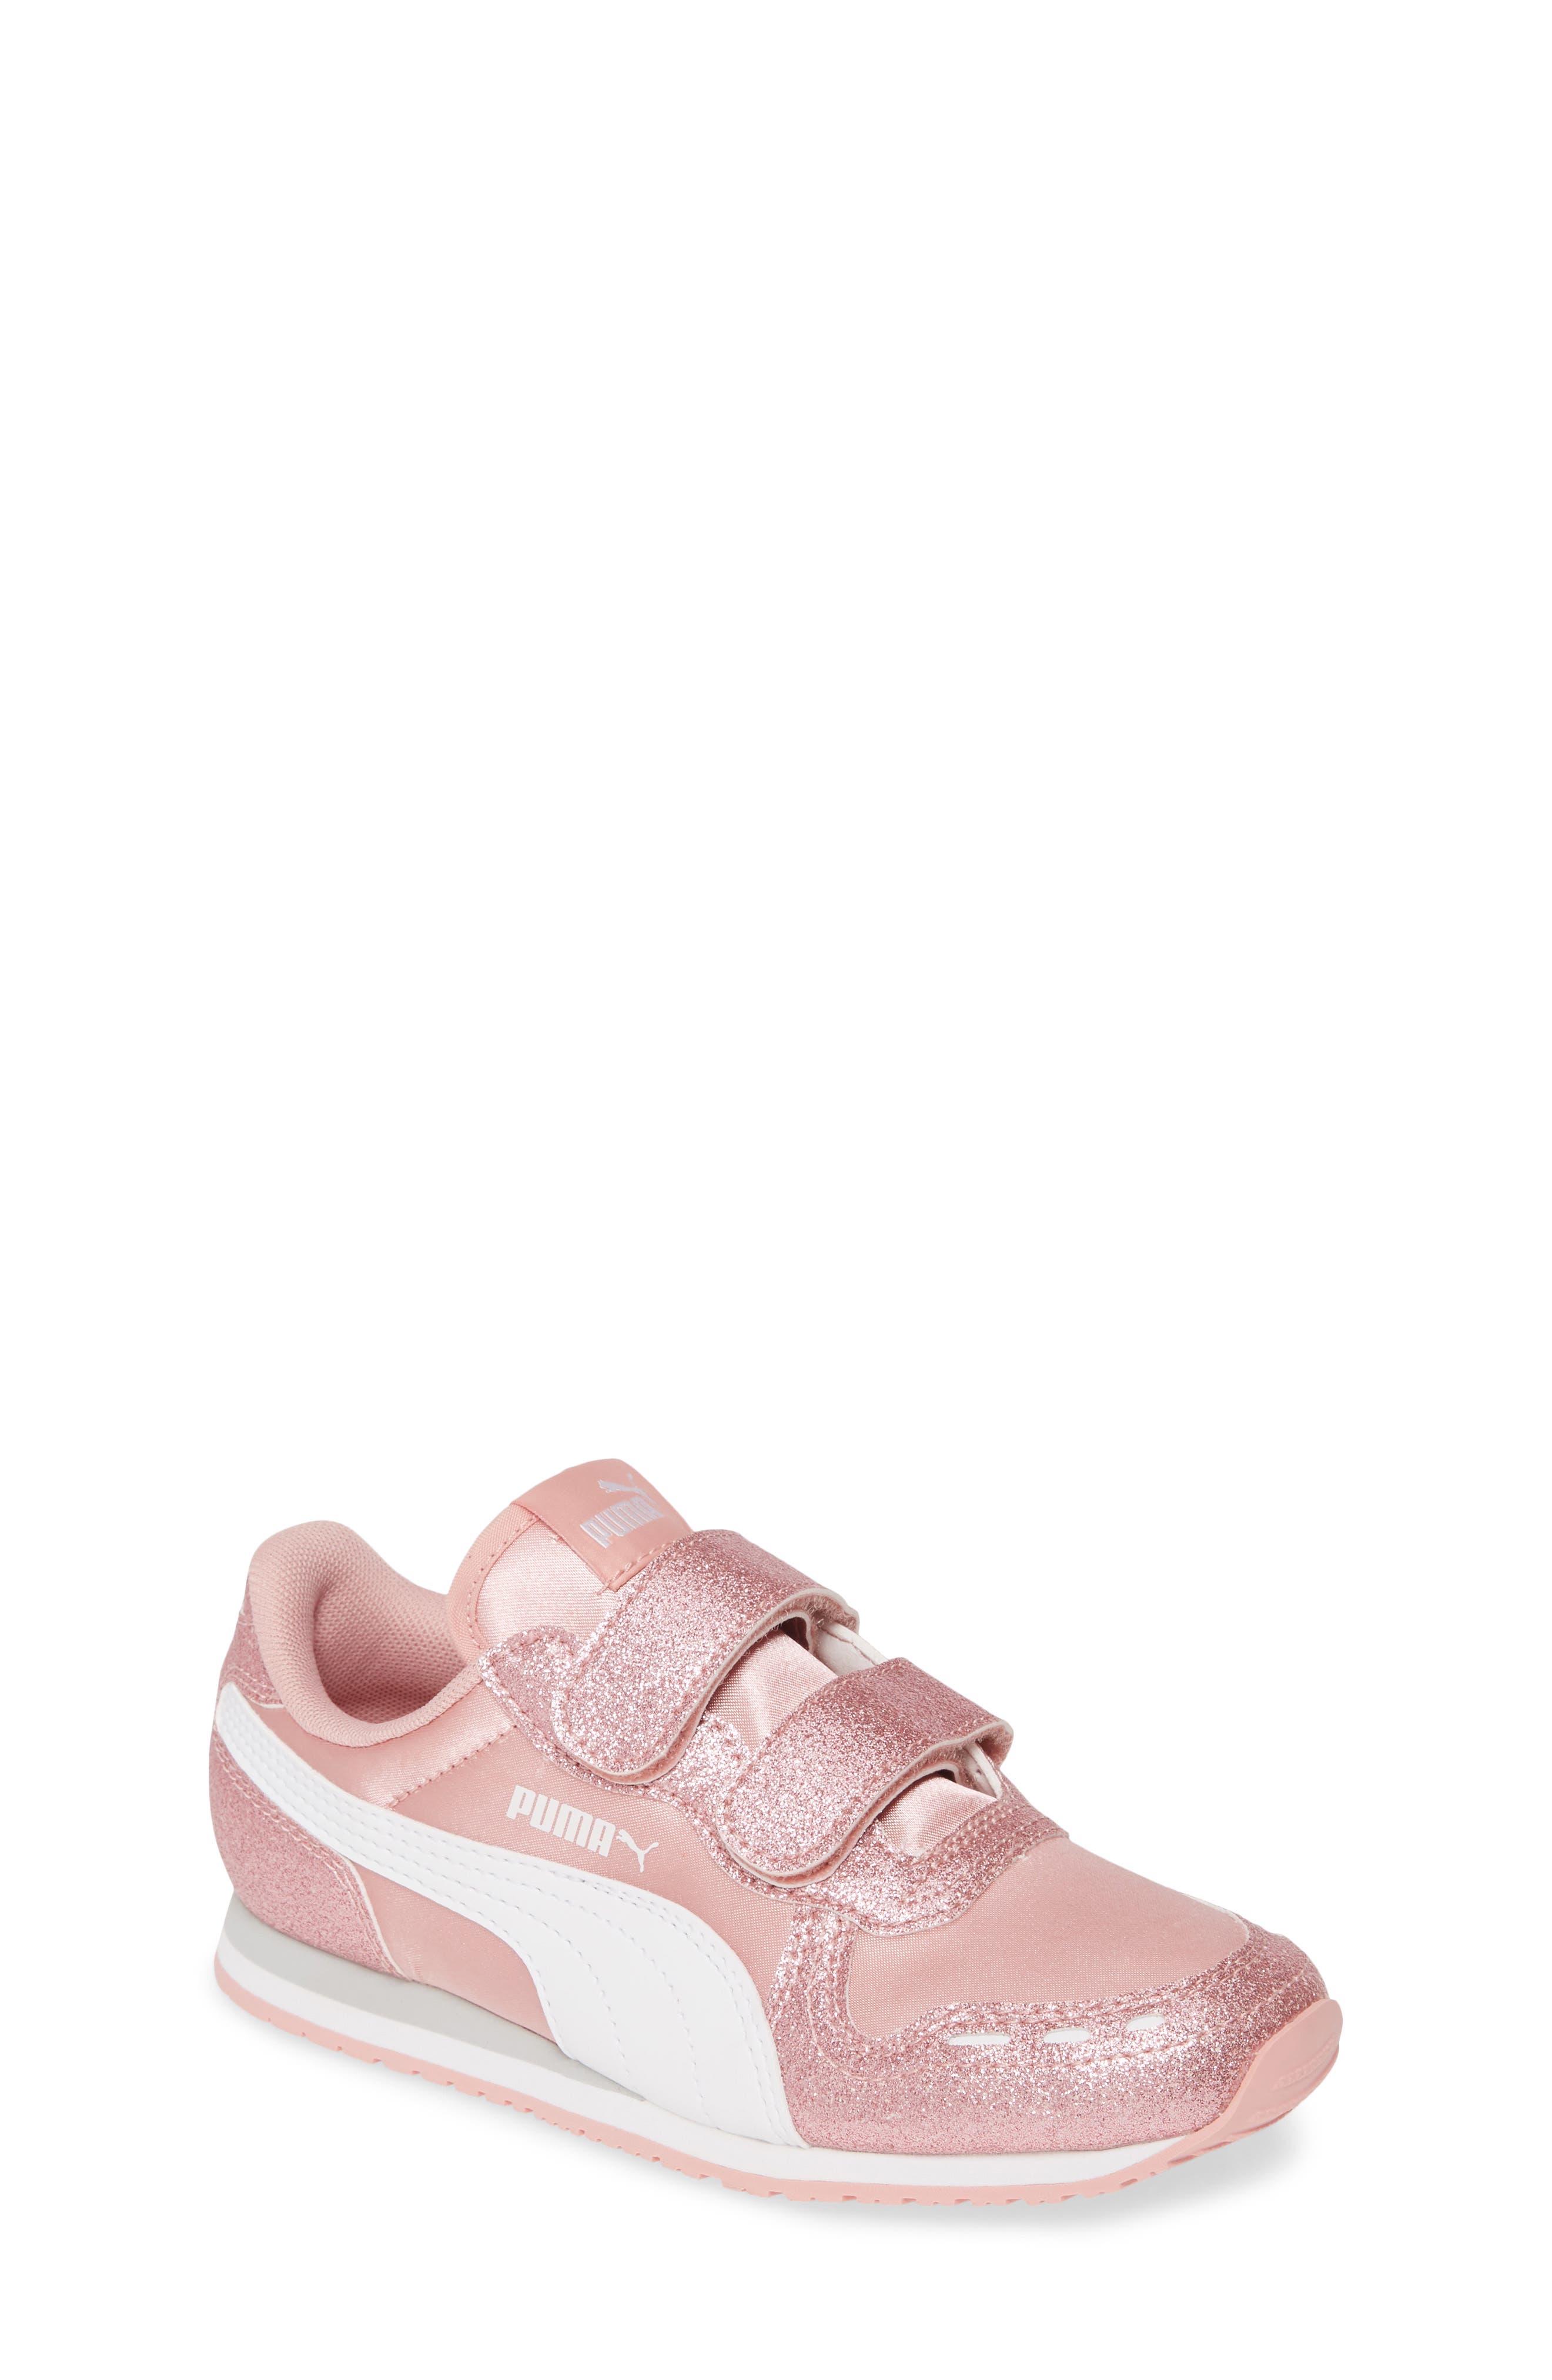 puma toddler shoes girl